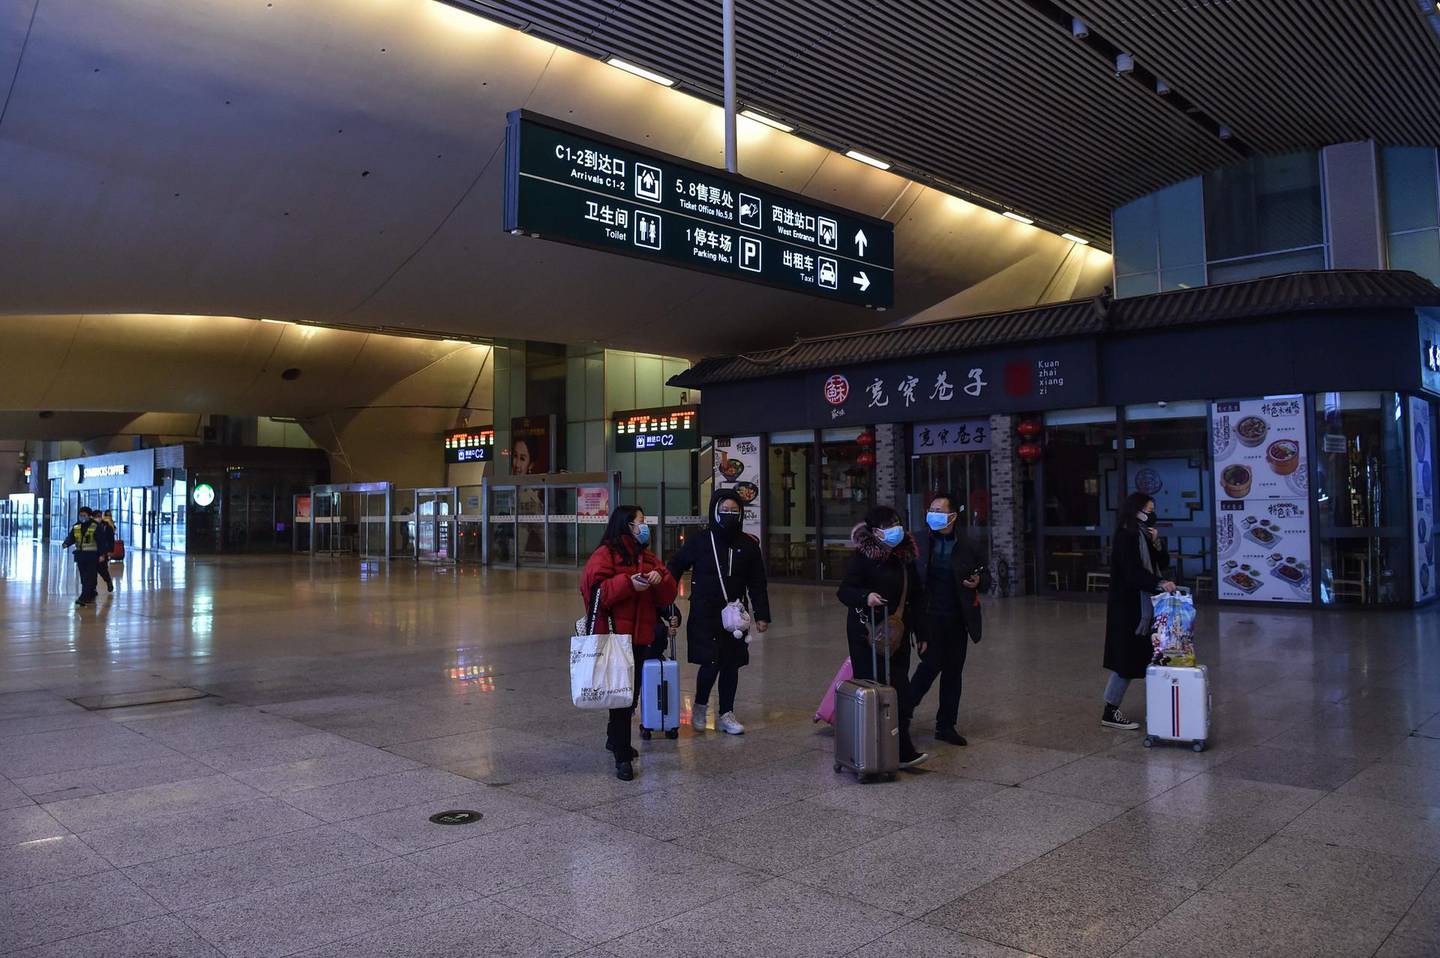 Travellers arrive at the nearly-deserted Wuhan train station, usually full of passengers ahead of the Lunar New Year, in Wuhan on January 23, 2020, described as the "main battlefield" for a SARS-like disease has killed at least 17 people and left more than 500 sick so far. China banned trains and planes from leaving a major city at the centre of a virus outbreak on January 23, seeking to seal off its 11 million people to contain the contagious disease that has claimed 17 lives, infected hundreds and spread to other countries.
 / AFP / HECTOR RETAMAL
